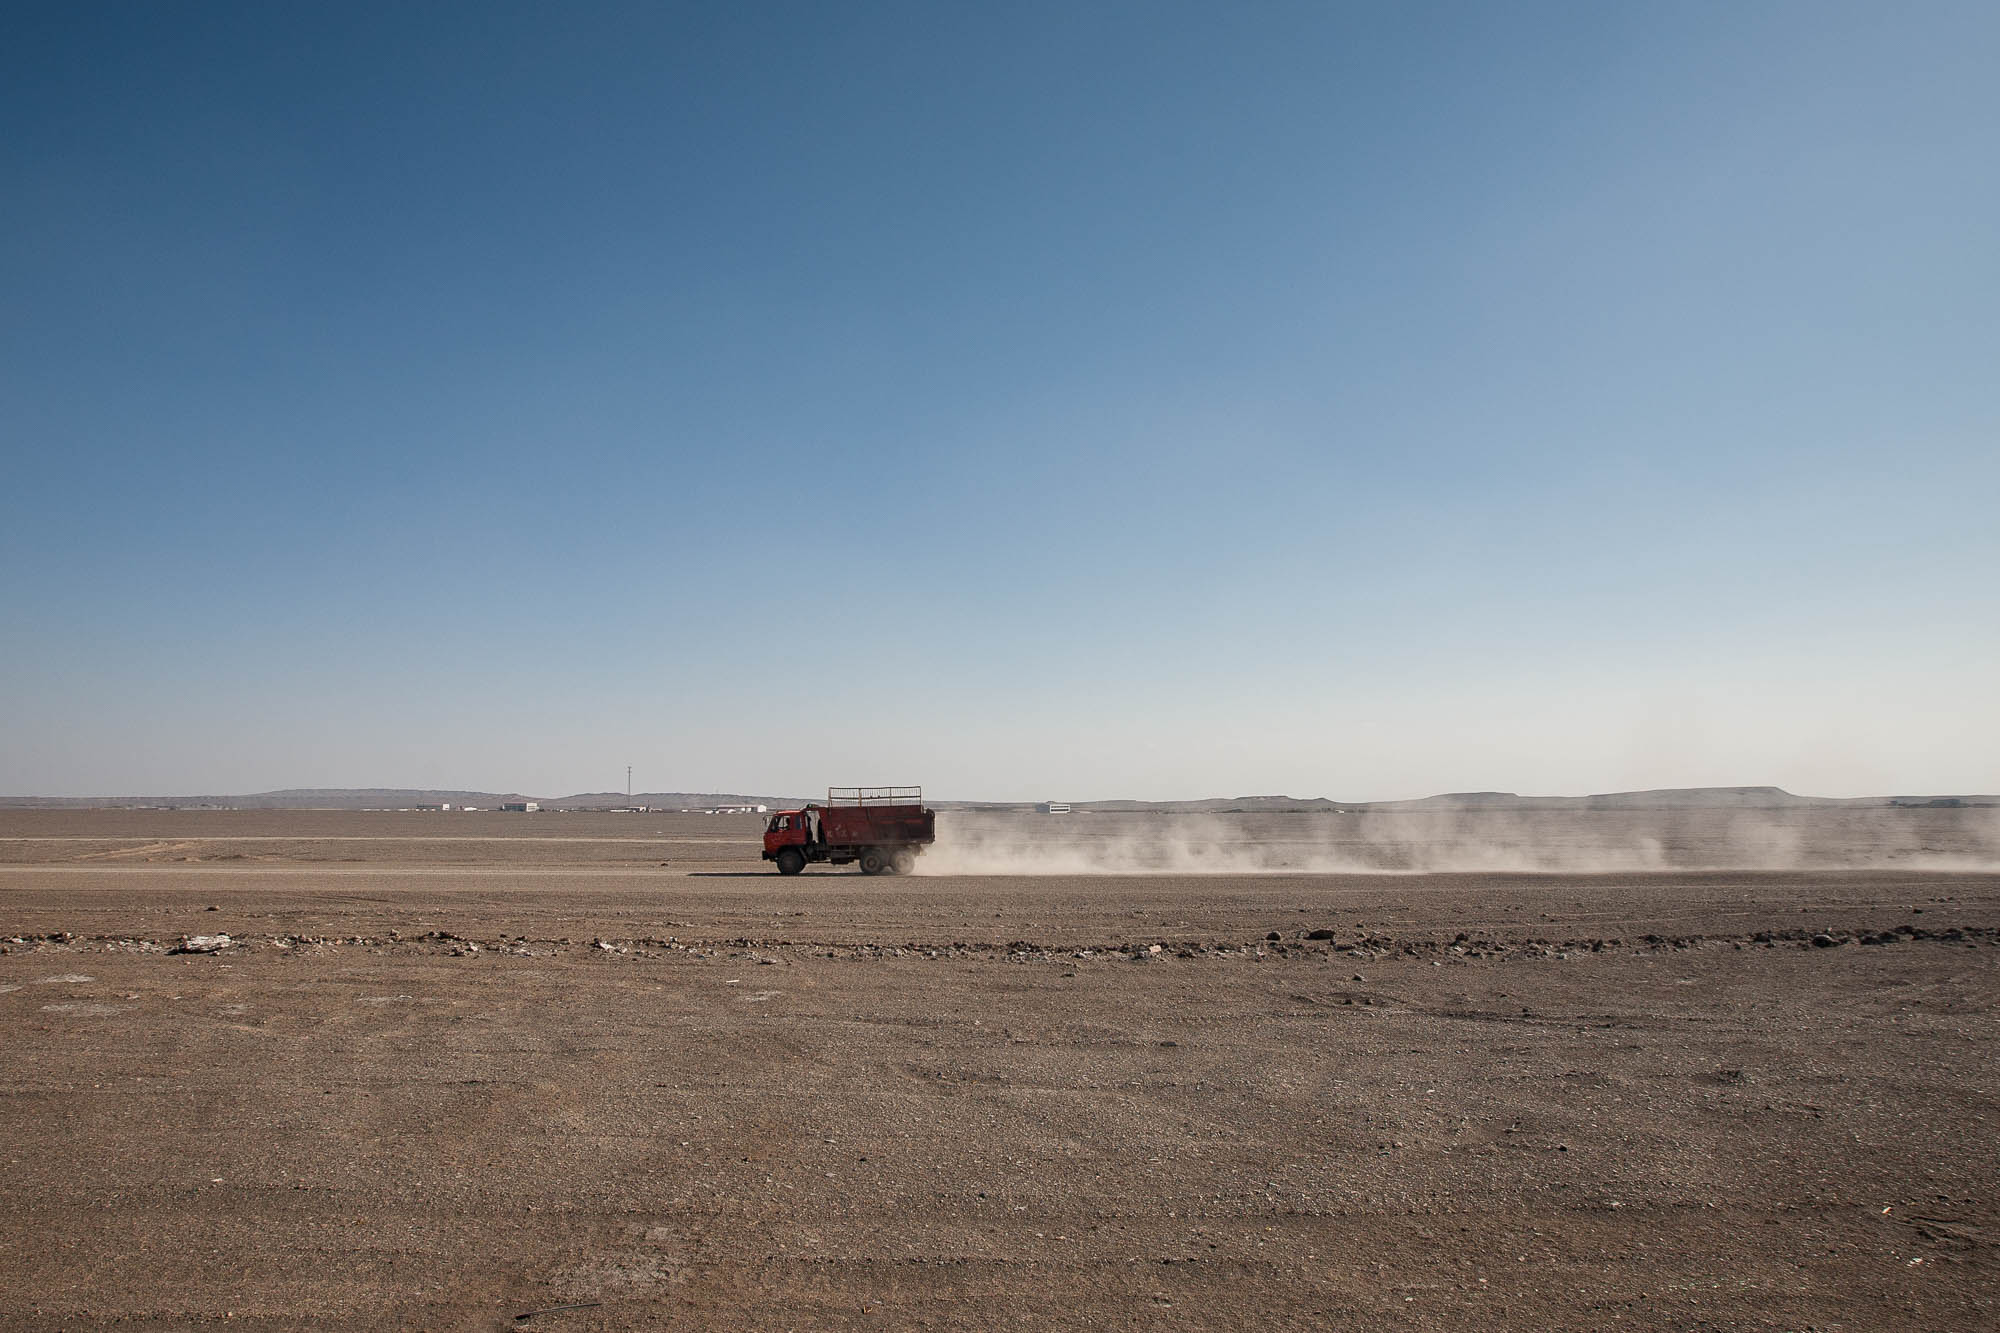 truck in the dust